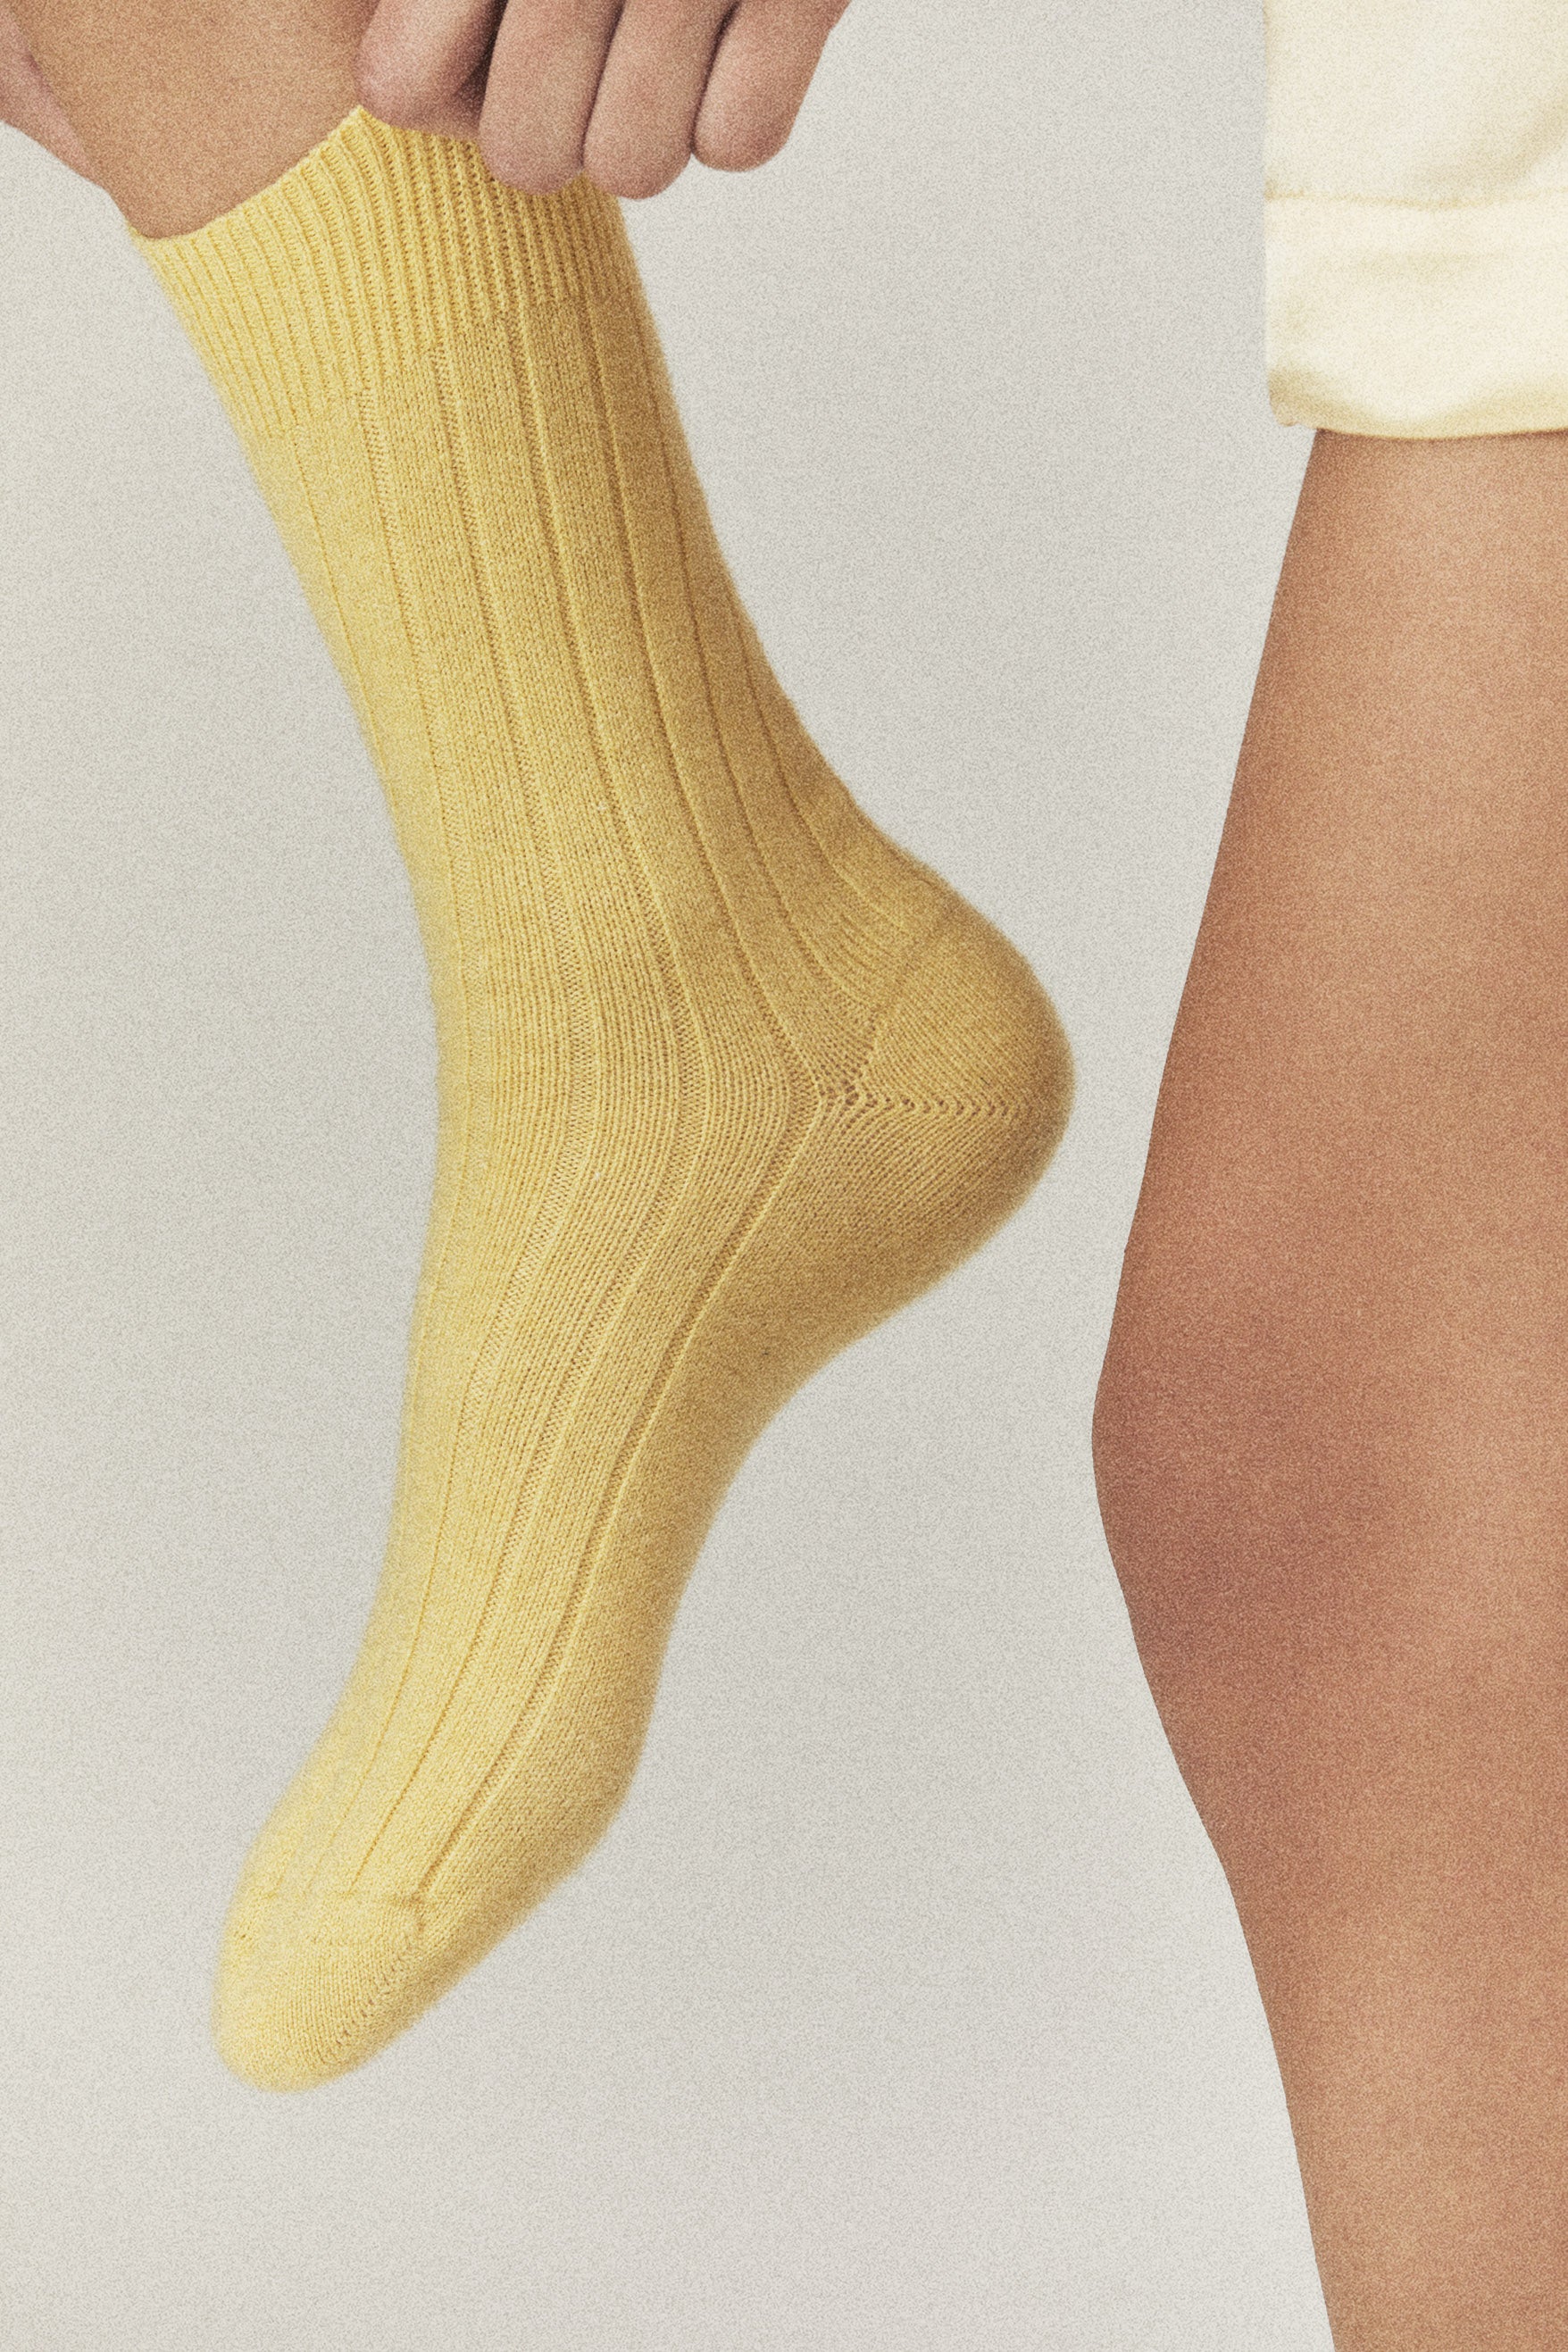 The Danielle Sock in Butter on figure, cashmere socks by Comme Si